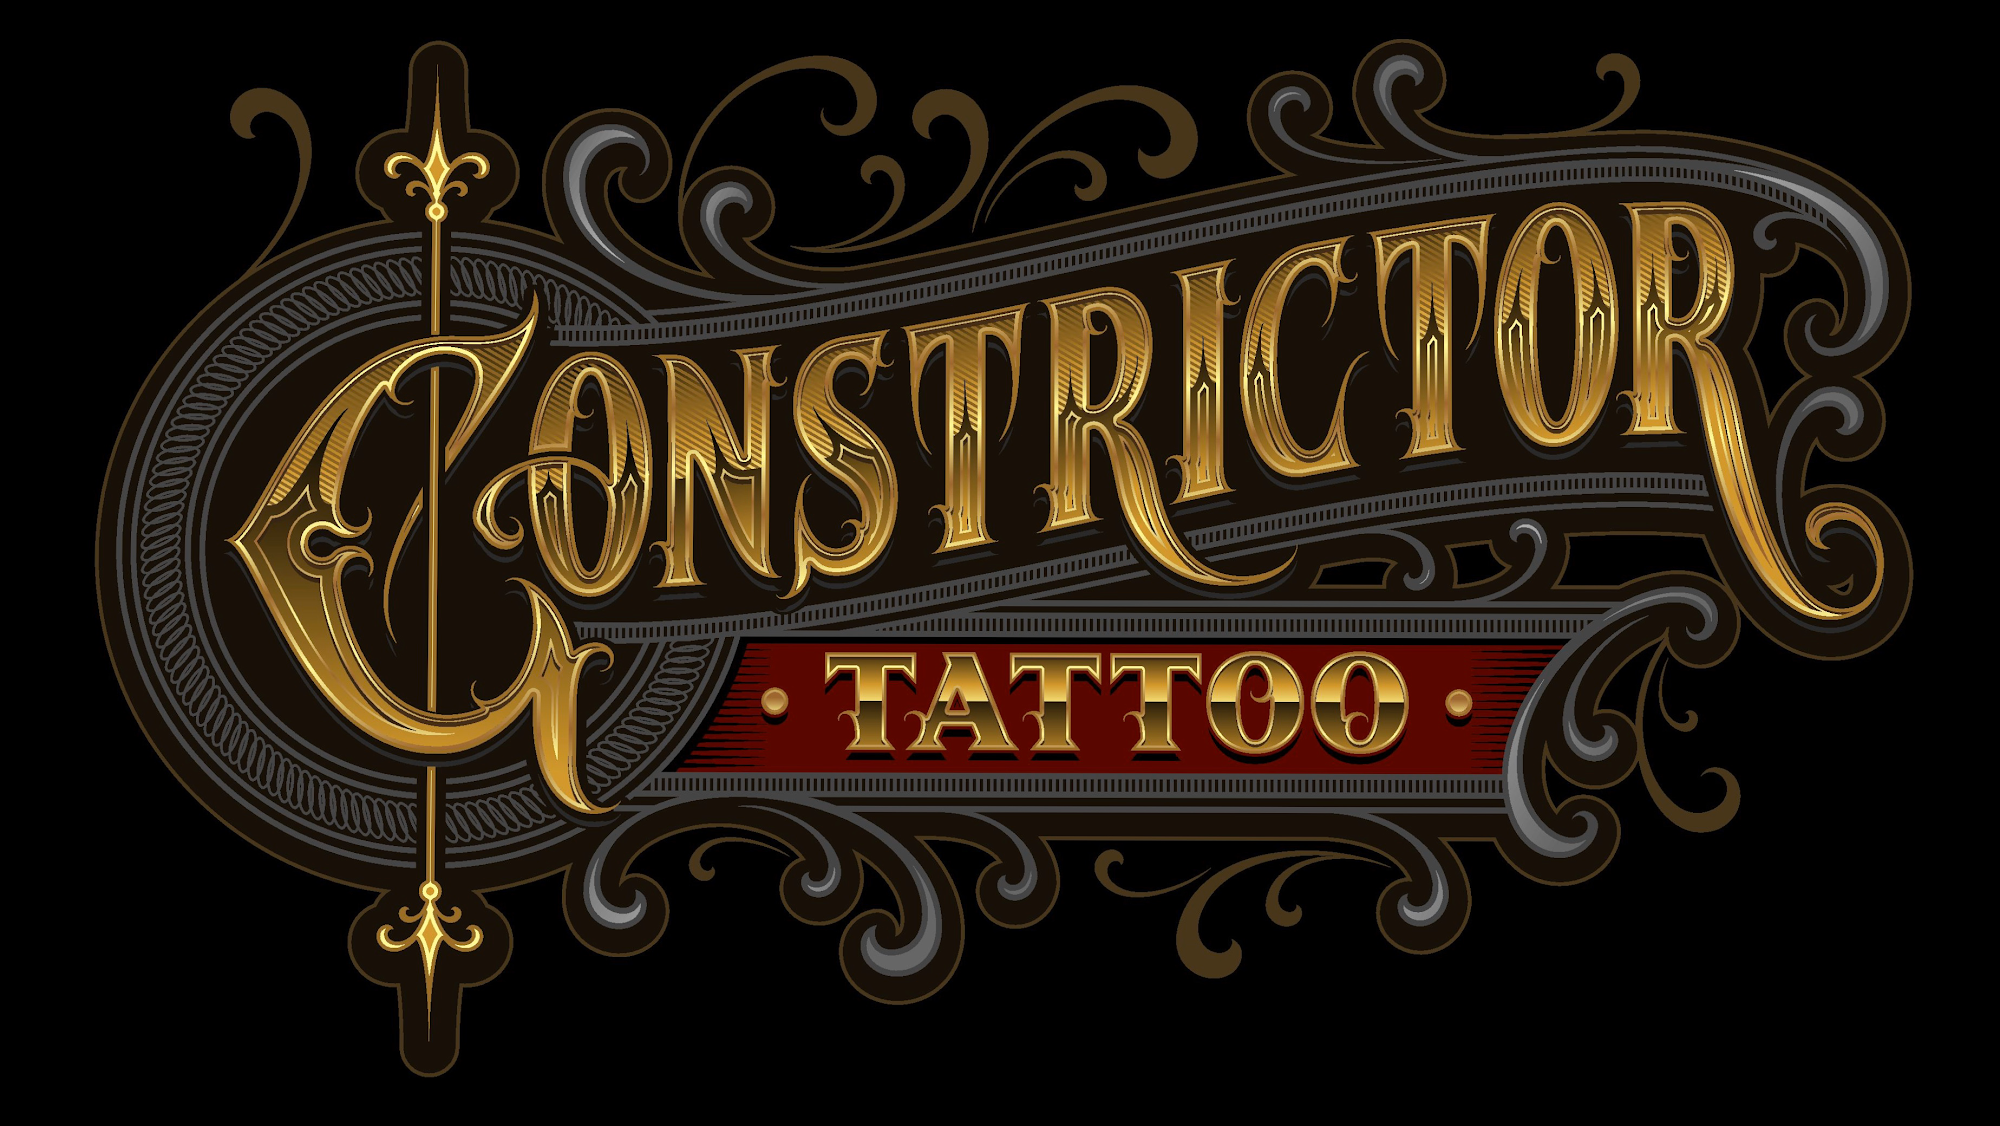 Constrictor Tattoo